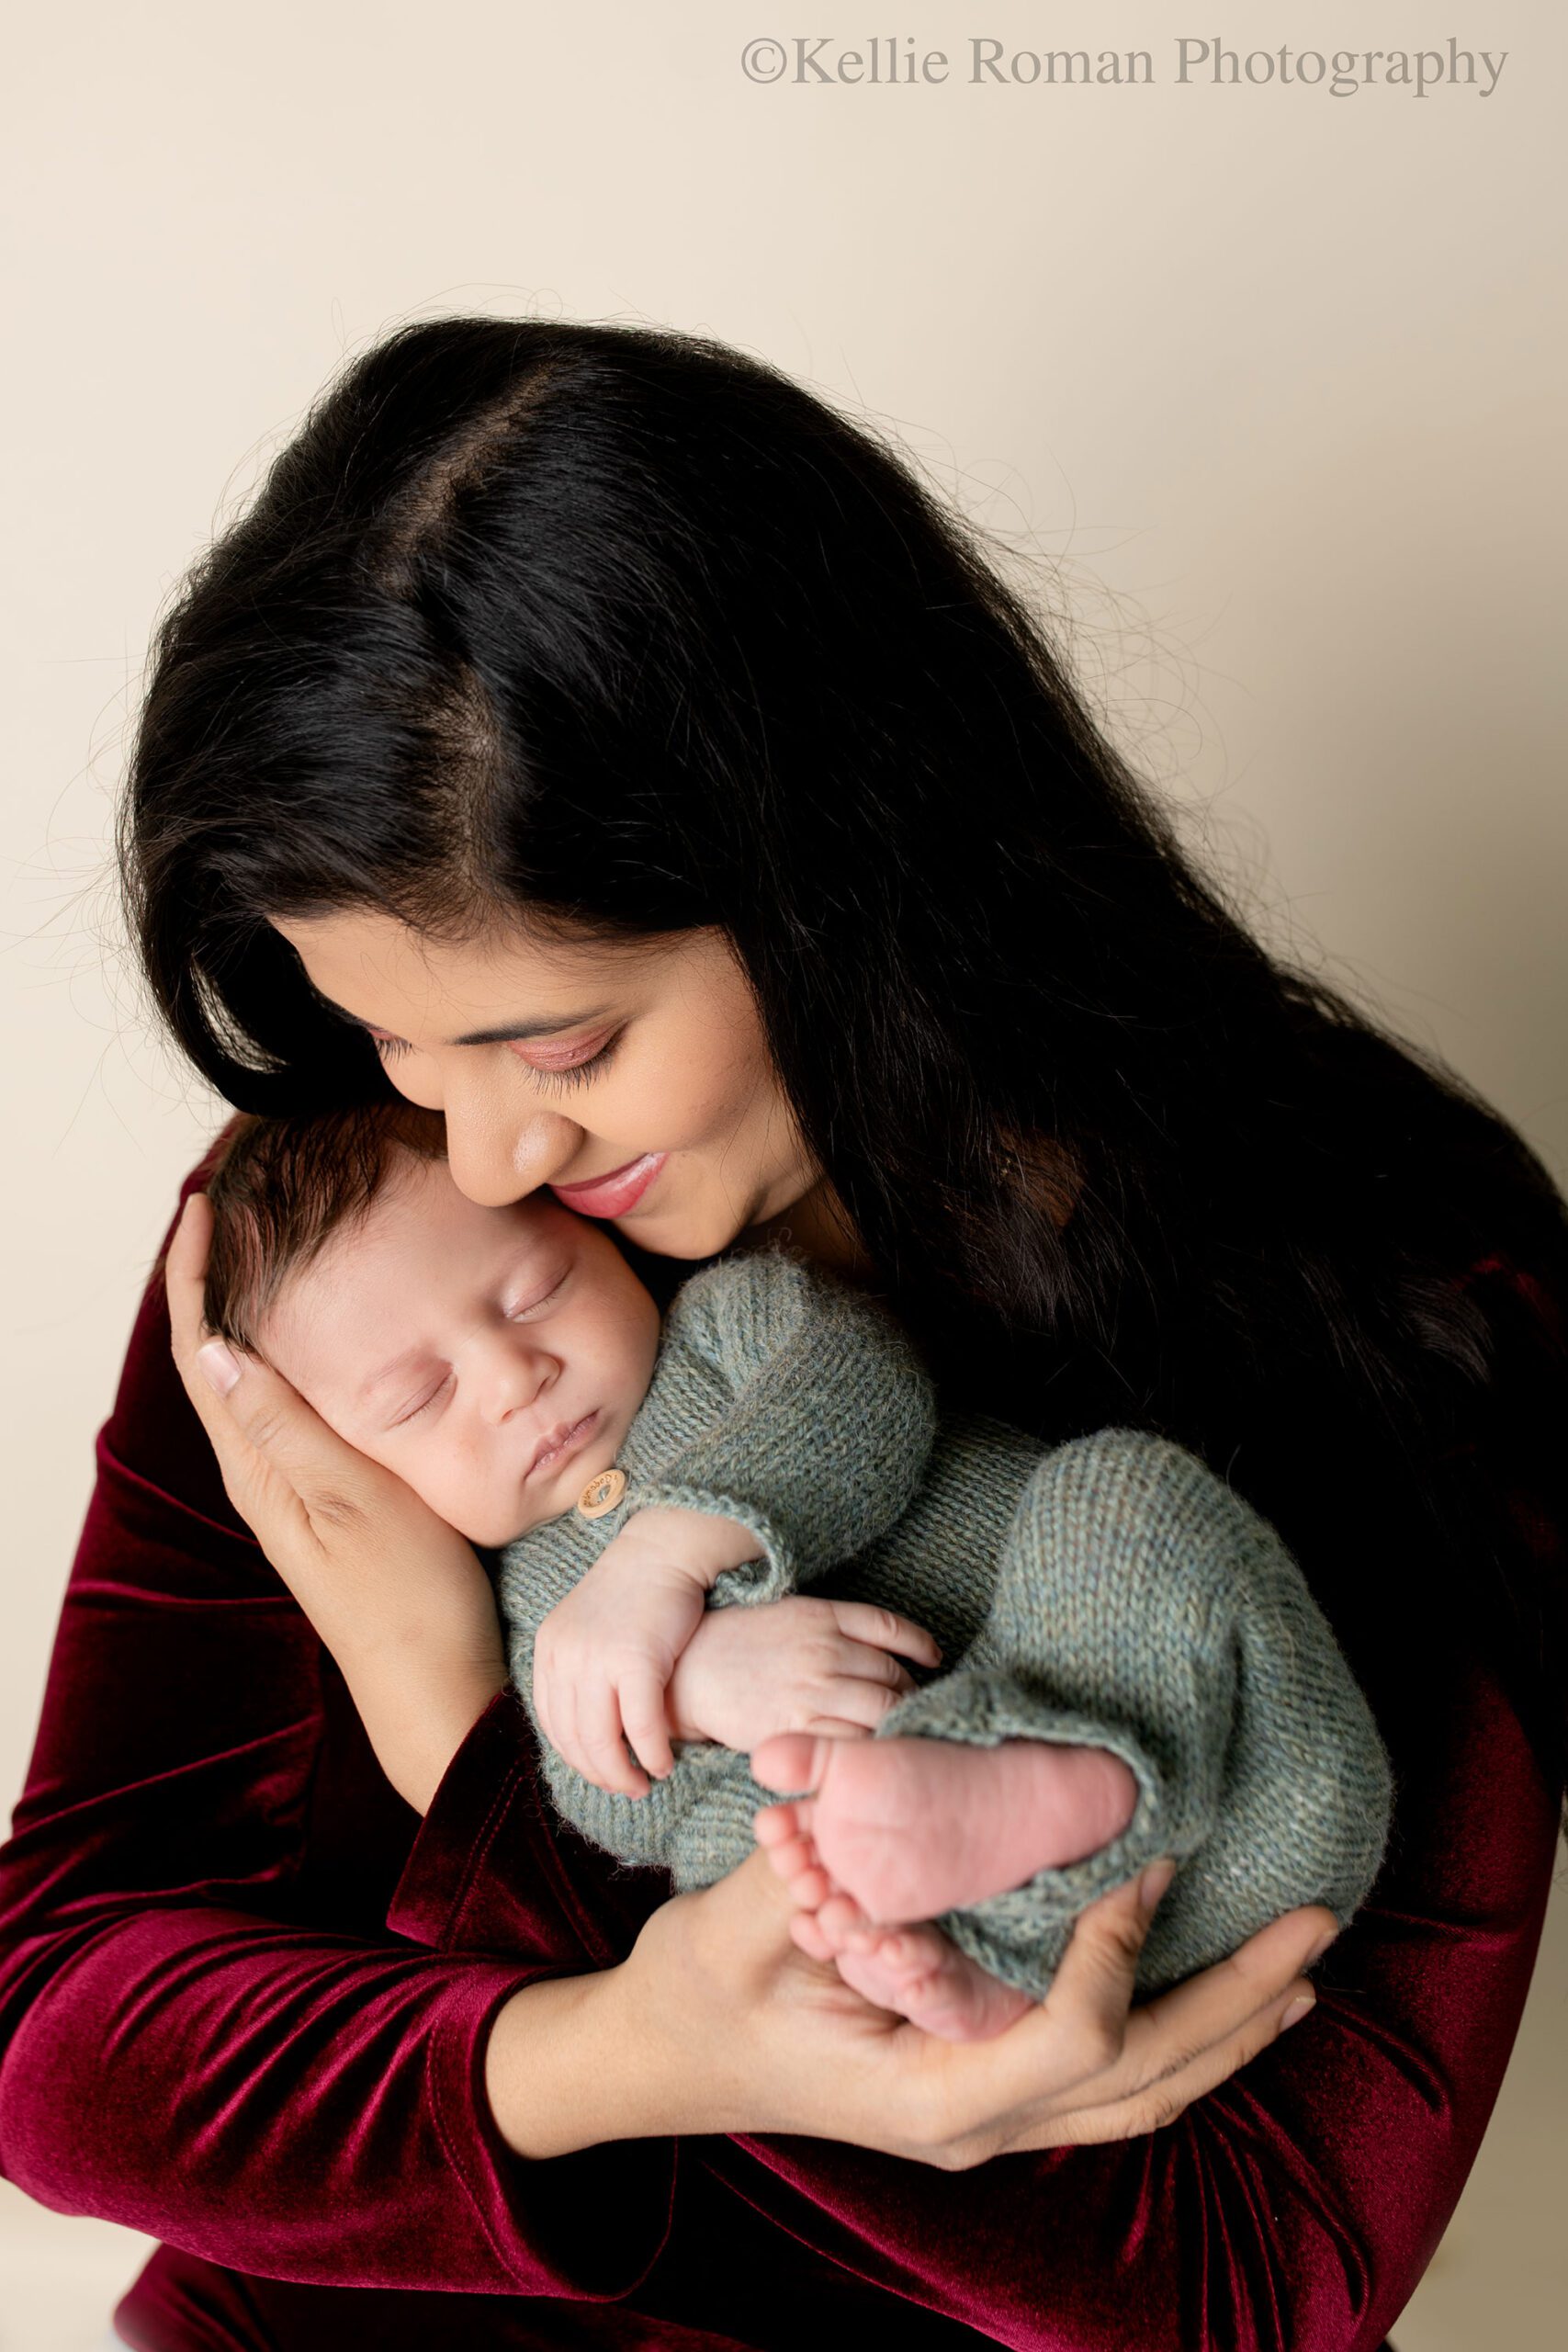 Newborn photographer in milwaukee. a mother is holding her newborn son up near her face and is snuggling with him while closing her eyes. the newborn boy is wearing a green romper with buttons. mom has a marroon velvet shirt on and has long black hair.